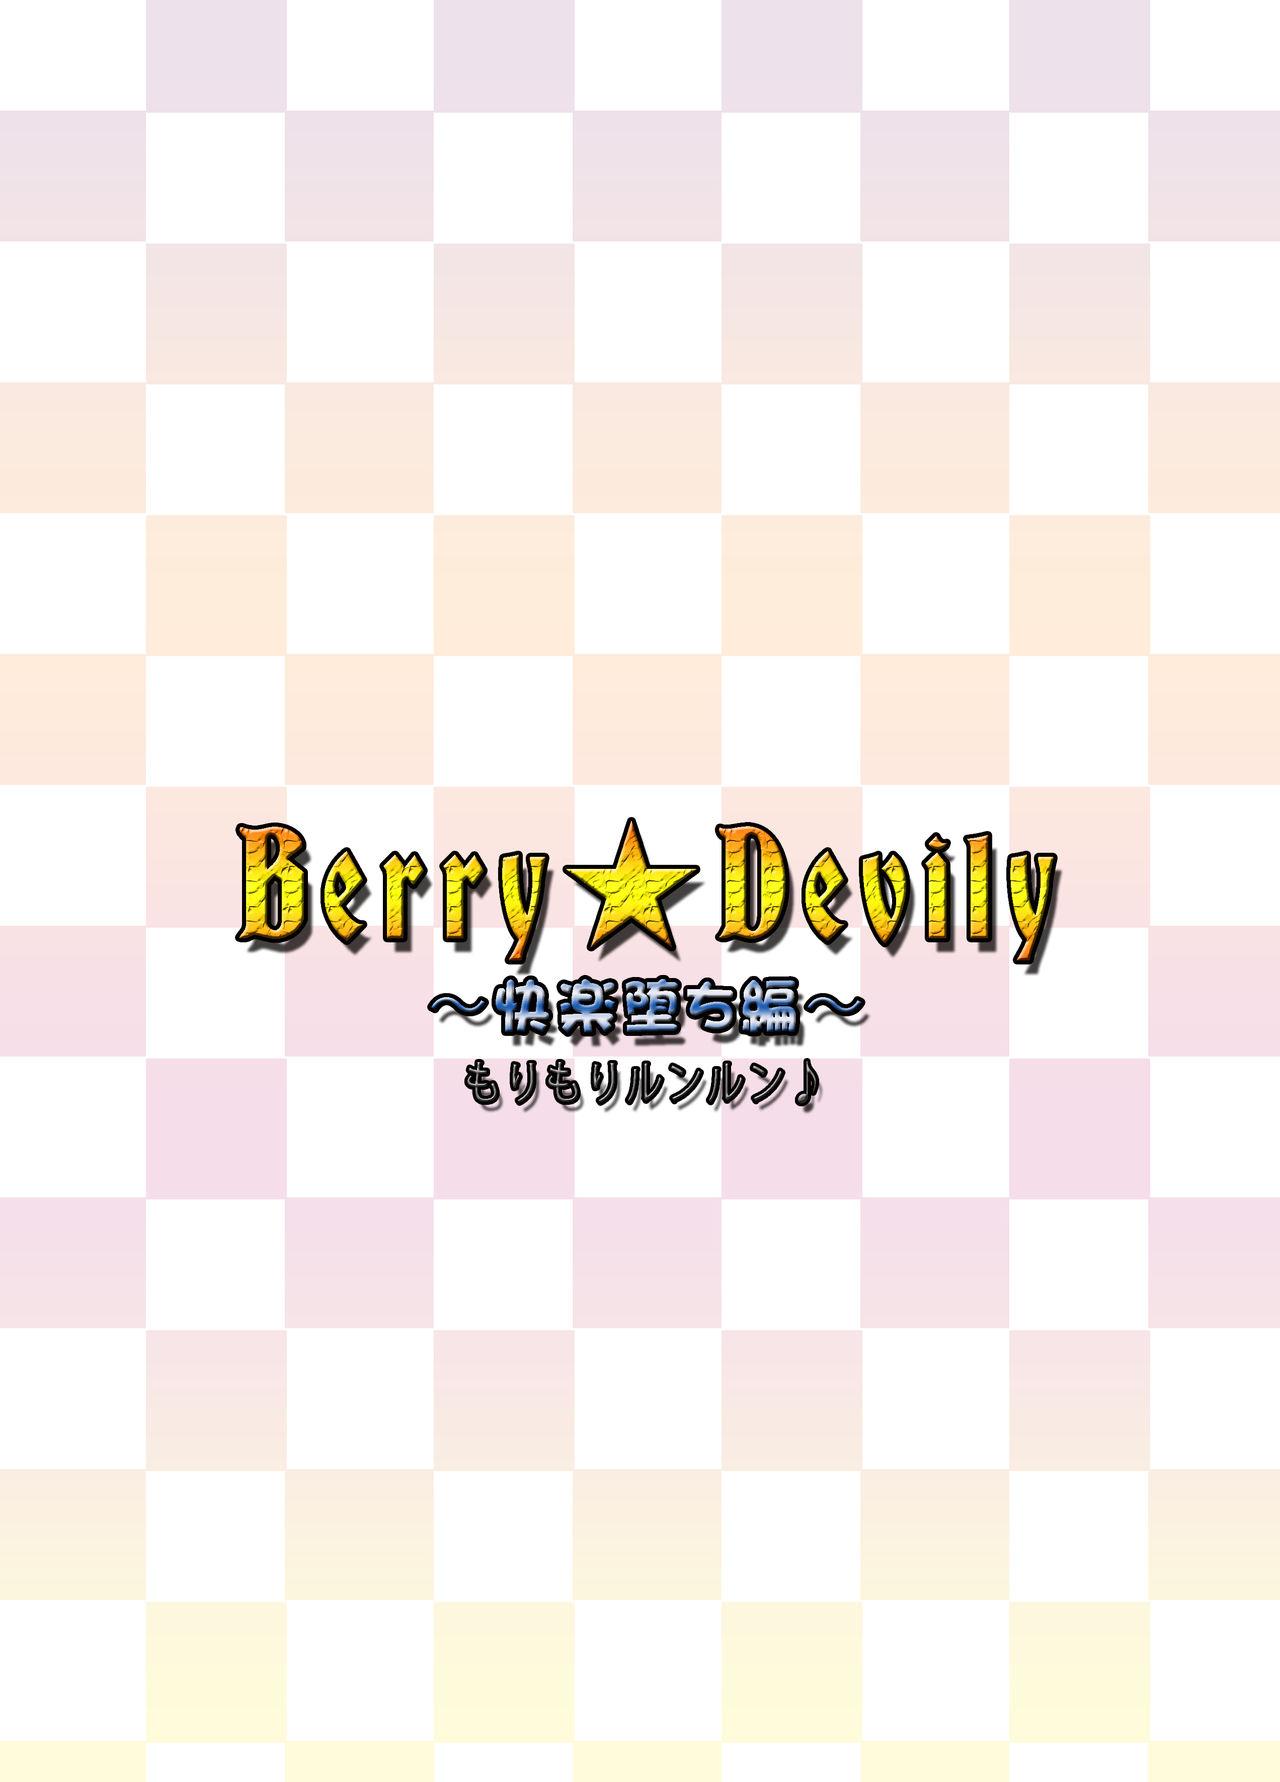 Berry Devily 31